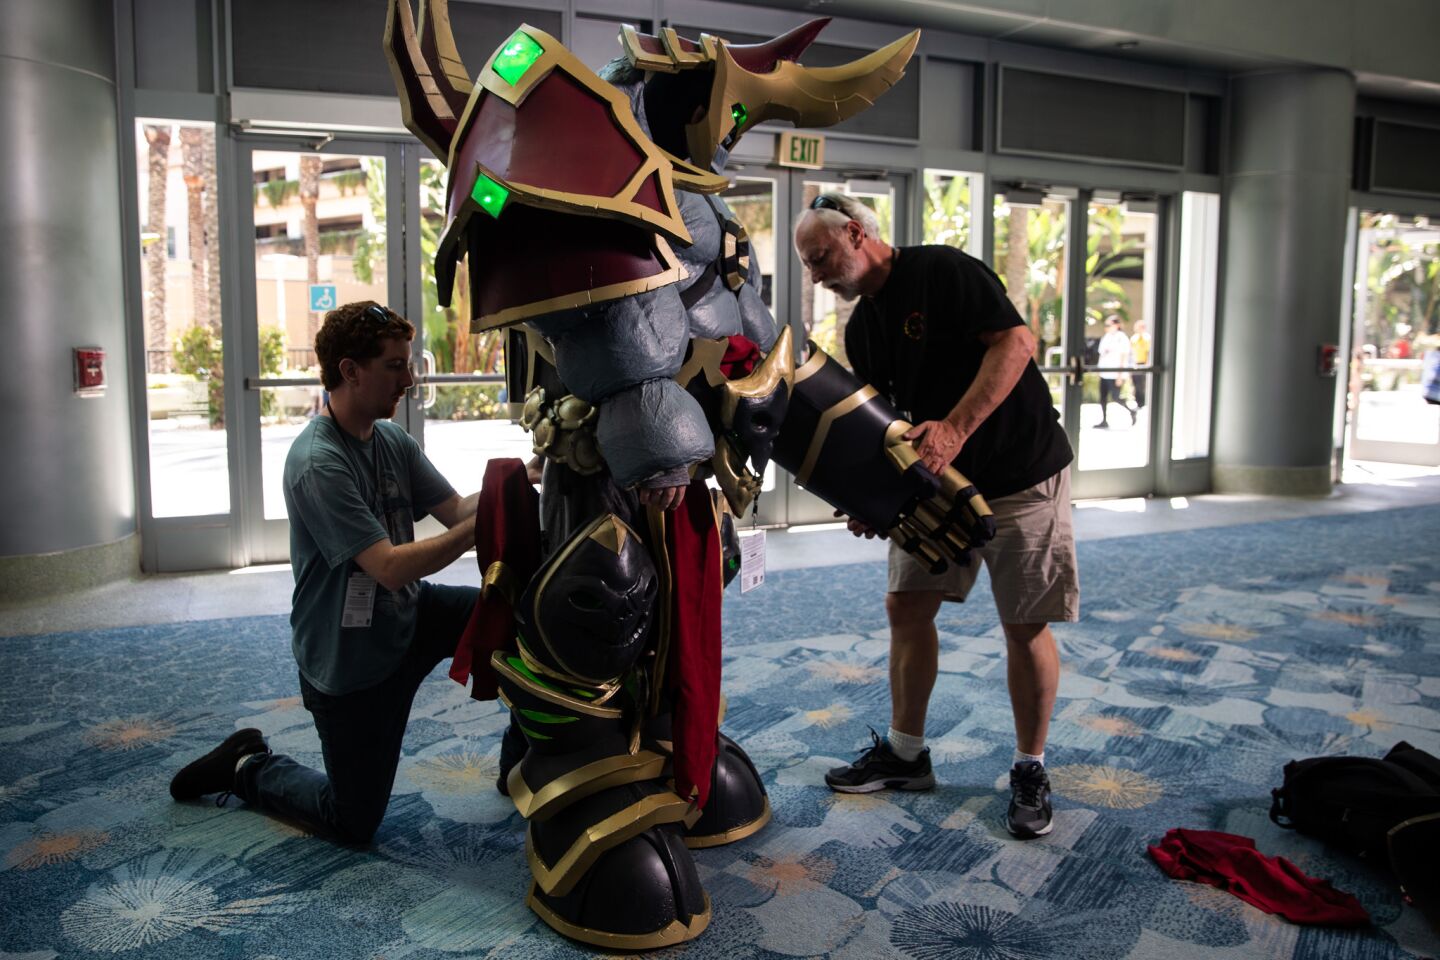 Joshua Winick, cosplaying as Fel Lord Zakuun from the game "World of Warcraft," gets help putting on his costume during the 2019 WonderCon at the Anaheim Convention Center.